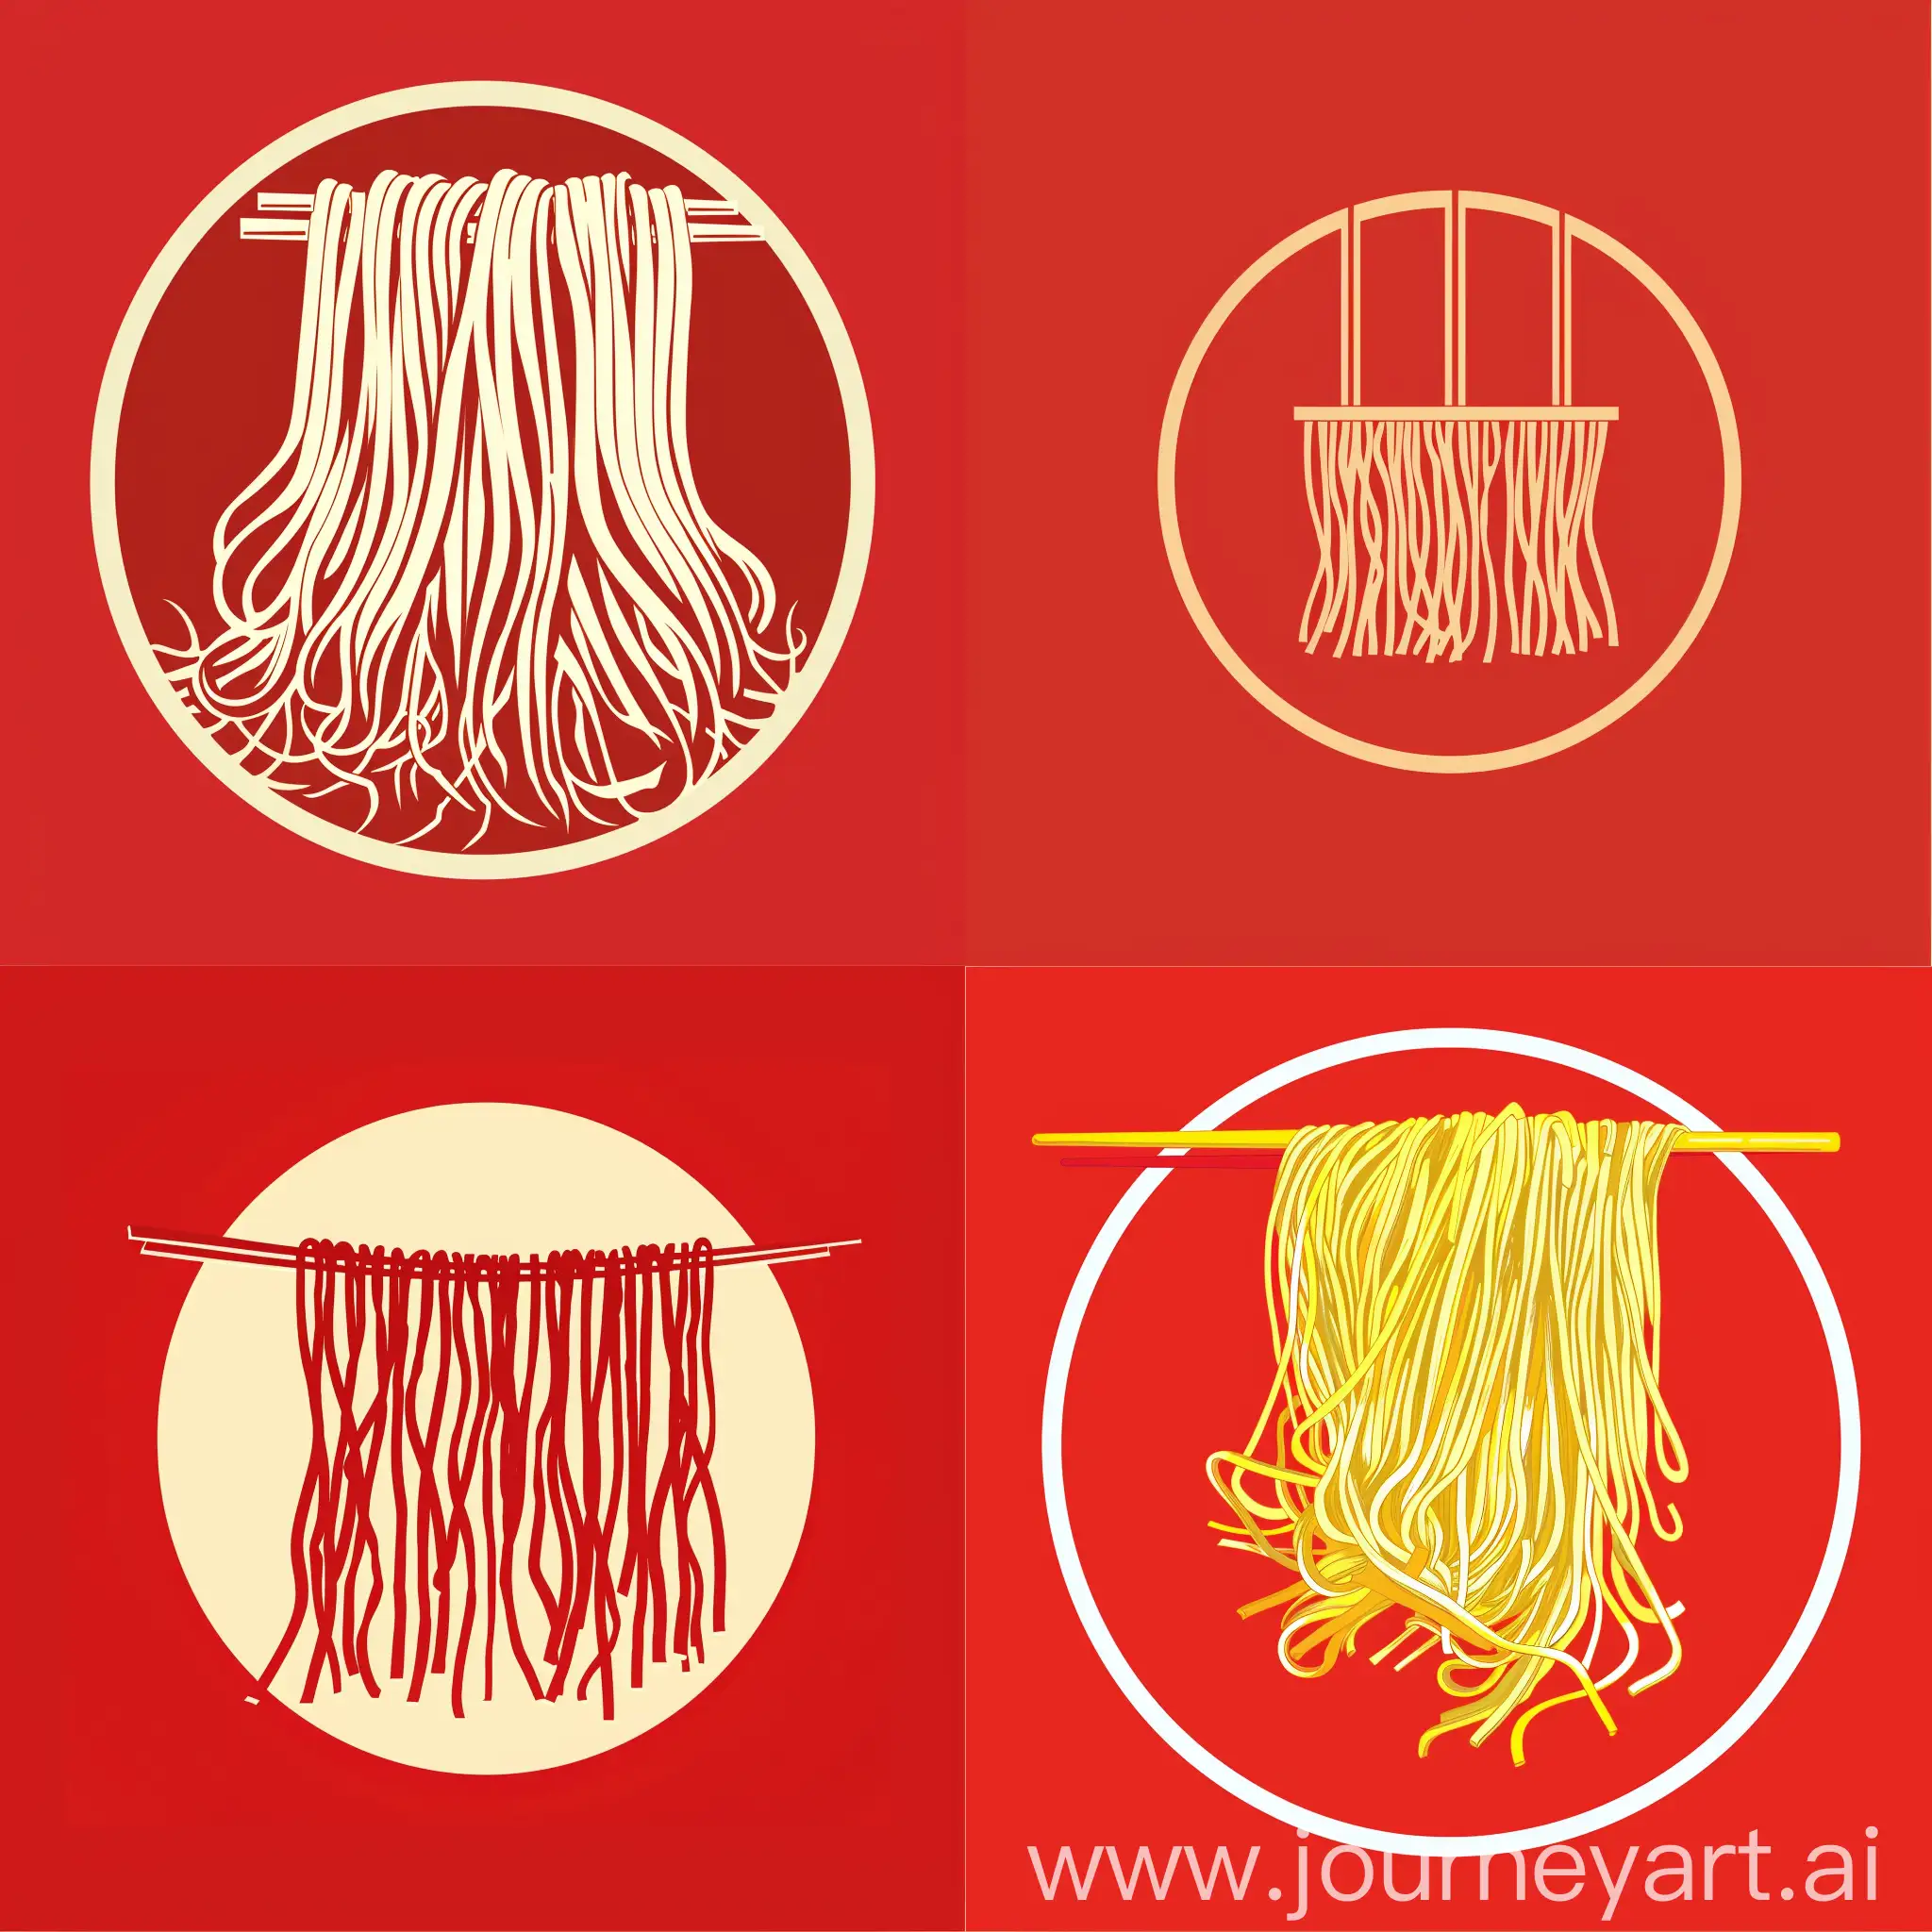 Circular-Logo-Design-with-Hanging-Chinese-Noodles-on-Red-Background